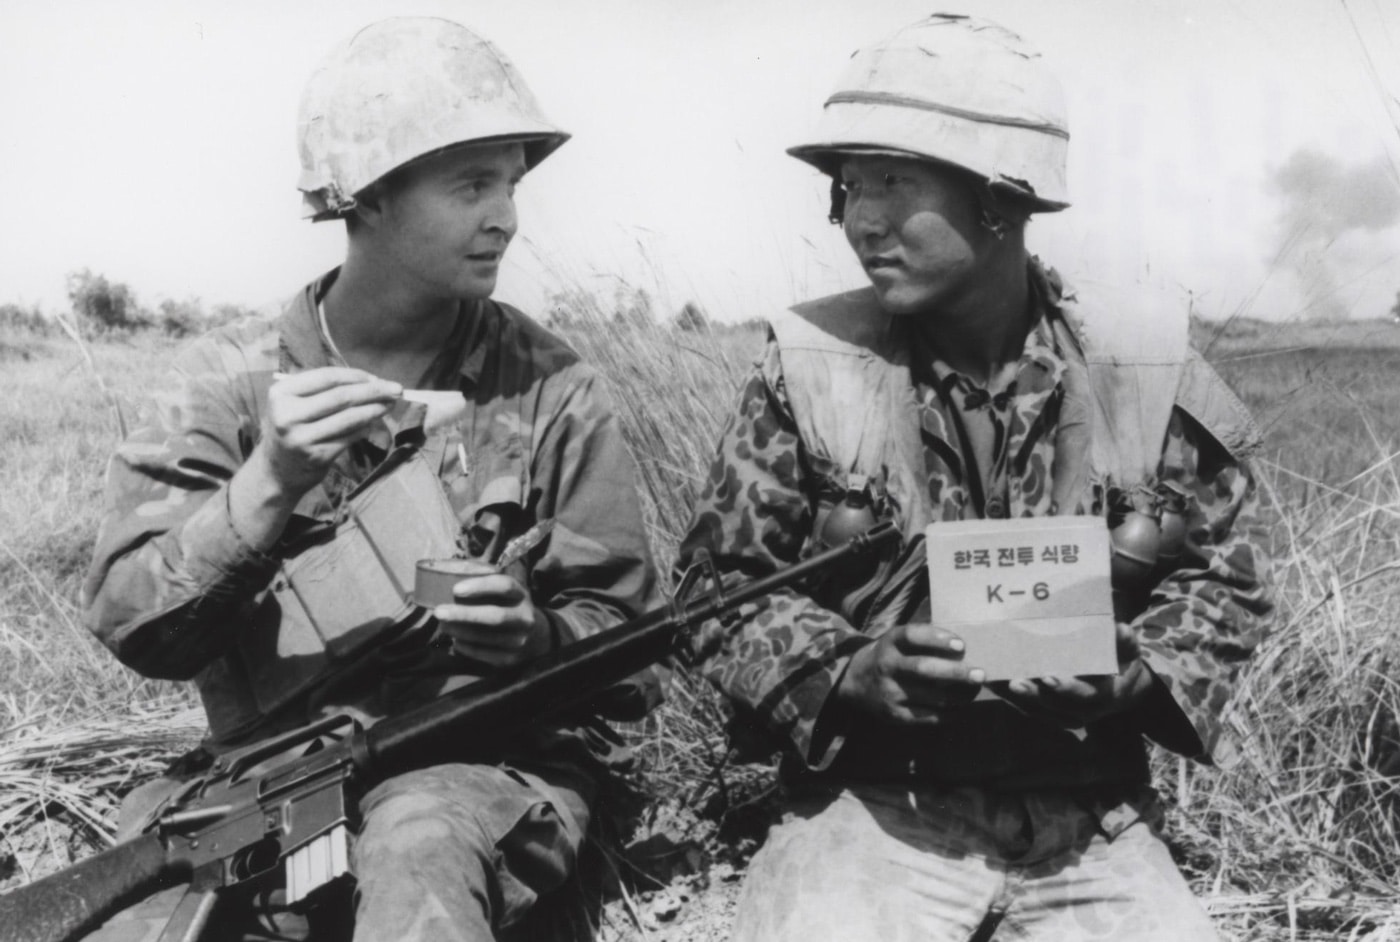 In this digital photo made from a film negative, US and Korean Marines swap military rations in the field during combat operations. The U.S. Marine has a M16A1 rifle on his lap. The South Korean Marine has a M26 grenade. The M26 is a fragmentation hand grenade developed by the United States military. It entered service around 1952 and was used in combat during the Korean War. Its distinct lemon shape led it to being nicknamed the "lemon grenade".